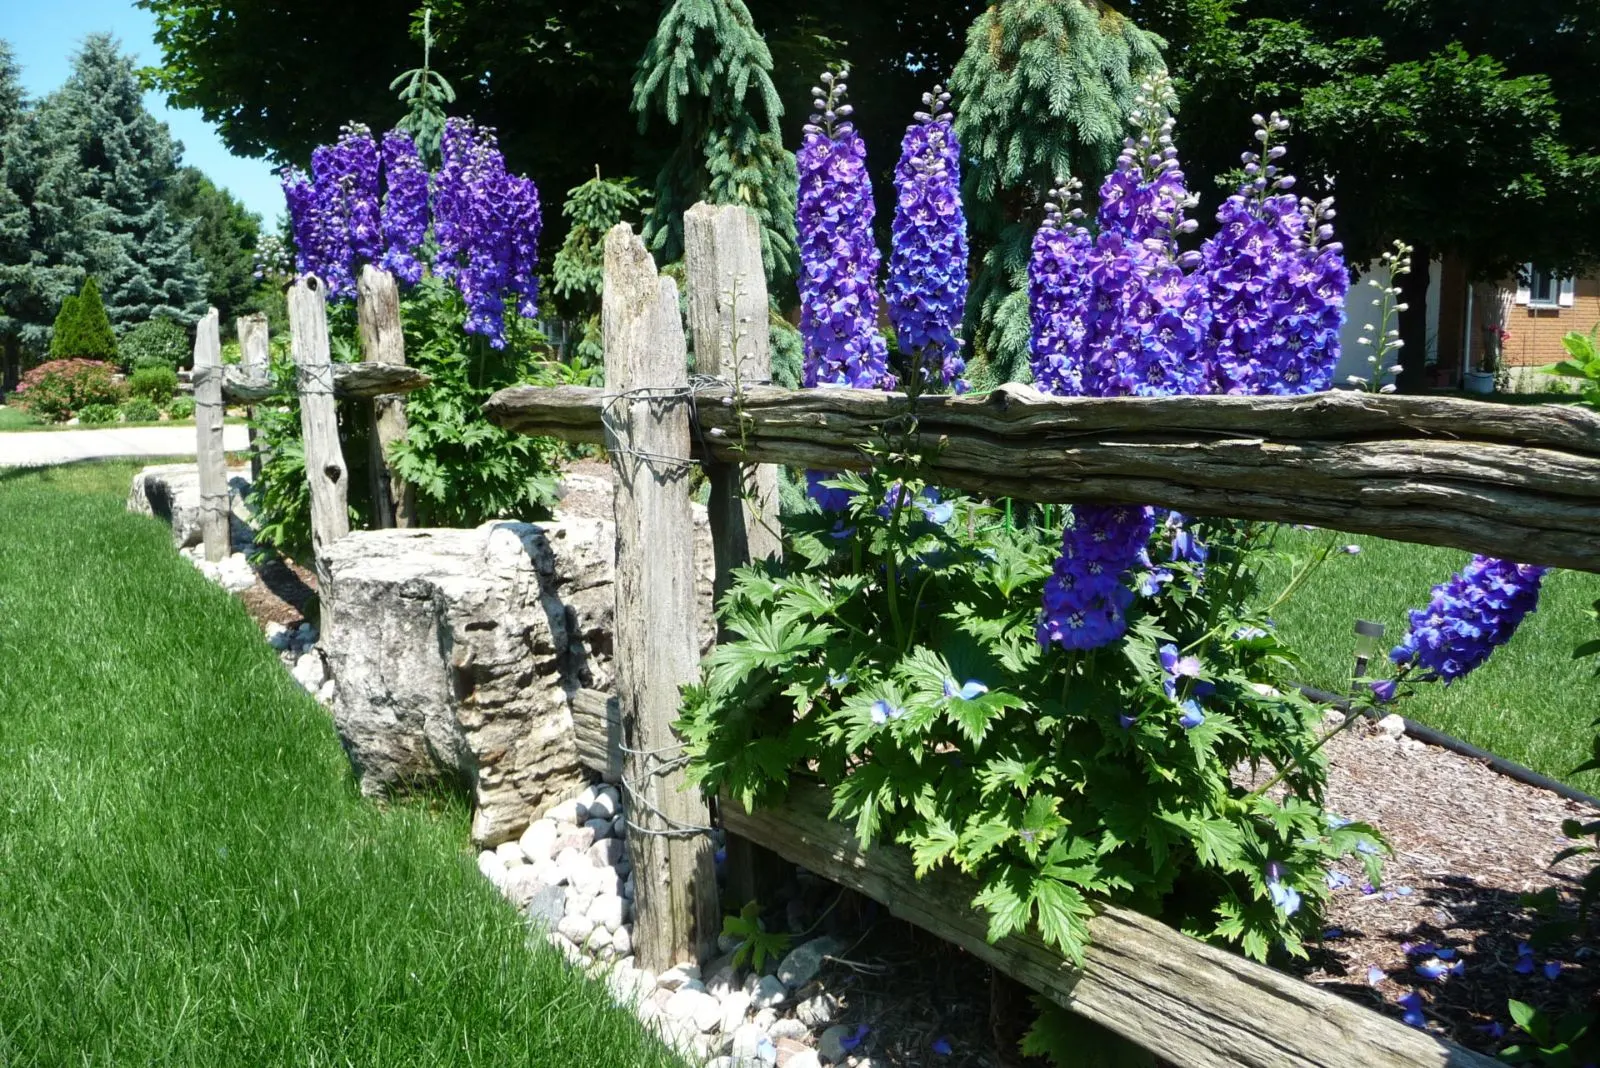 delphiniums planted along the fence